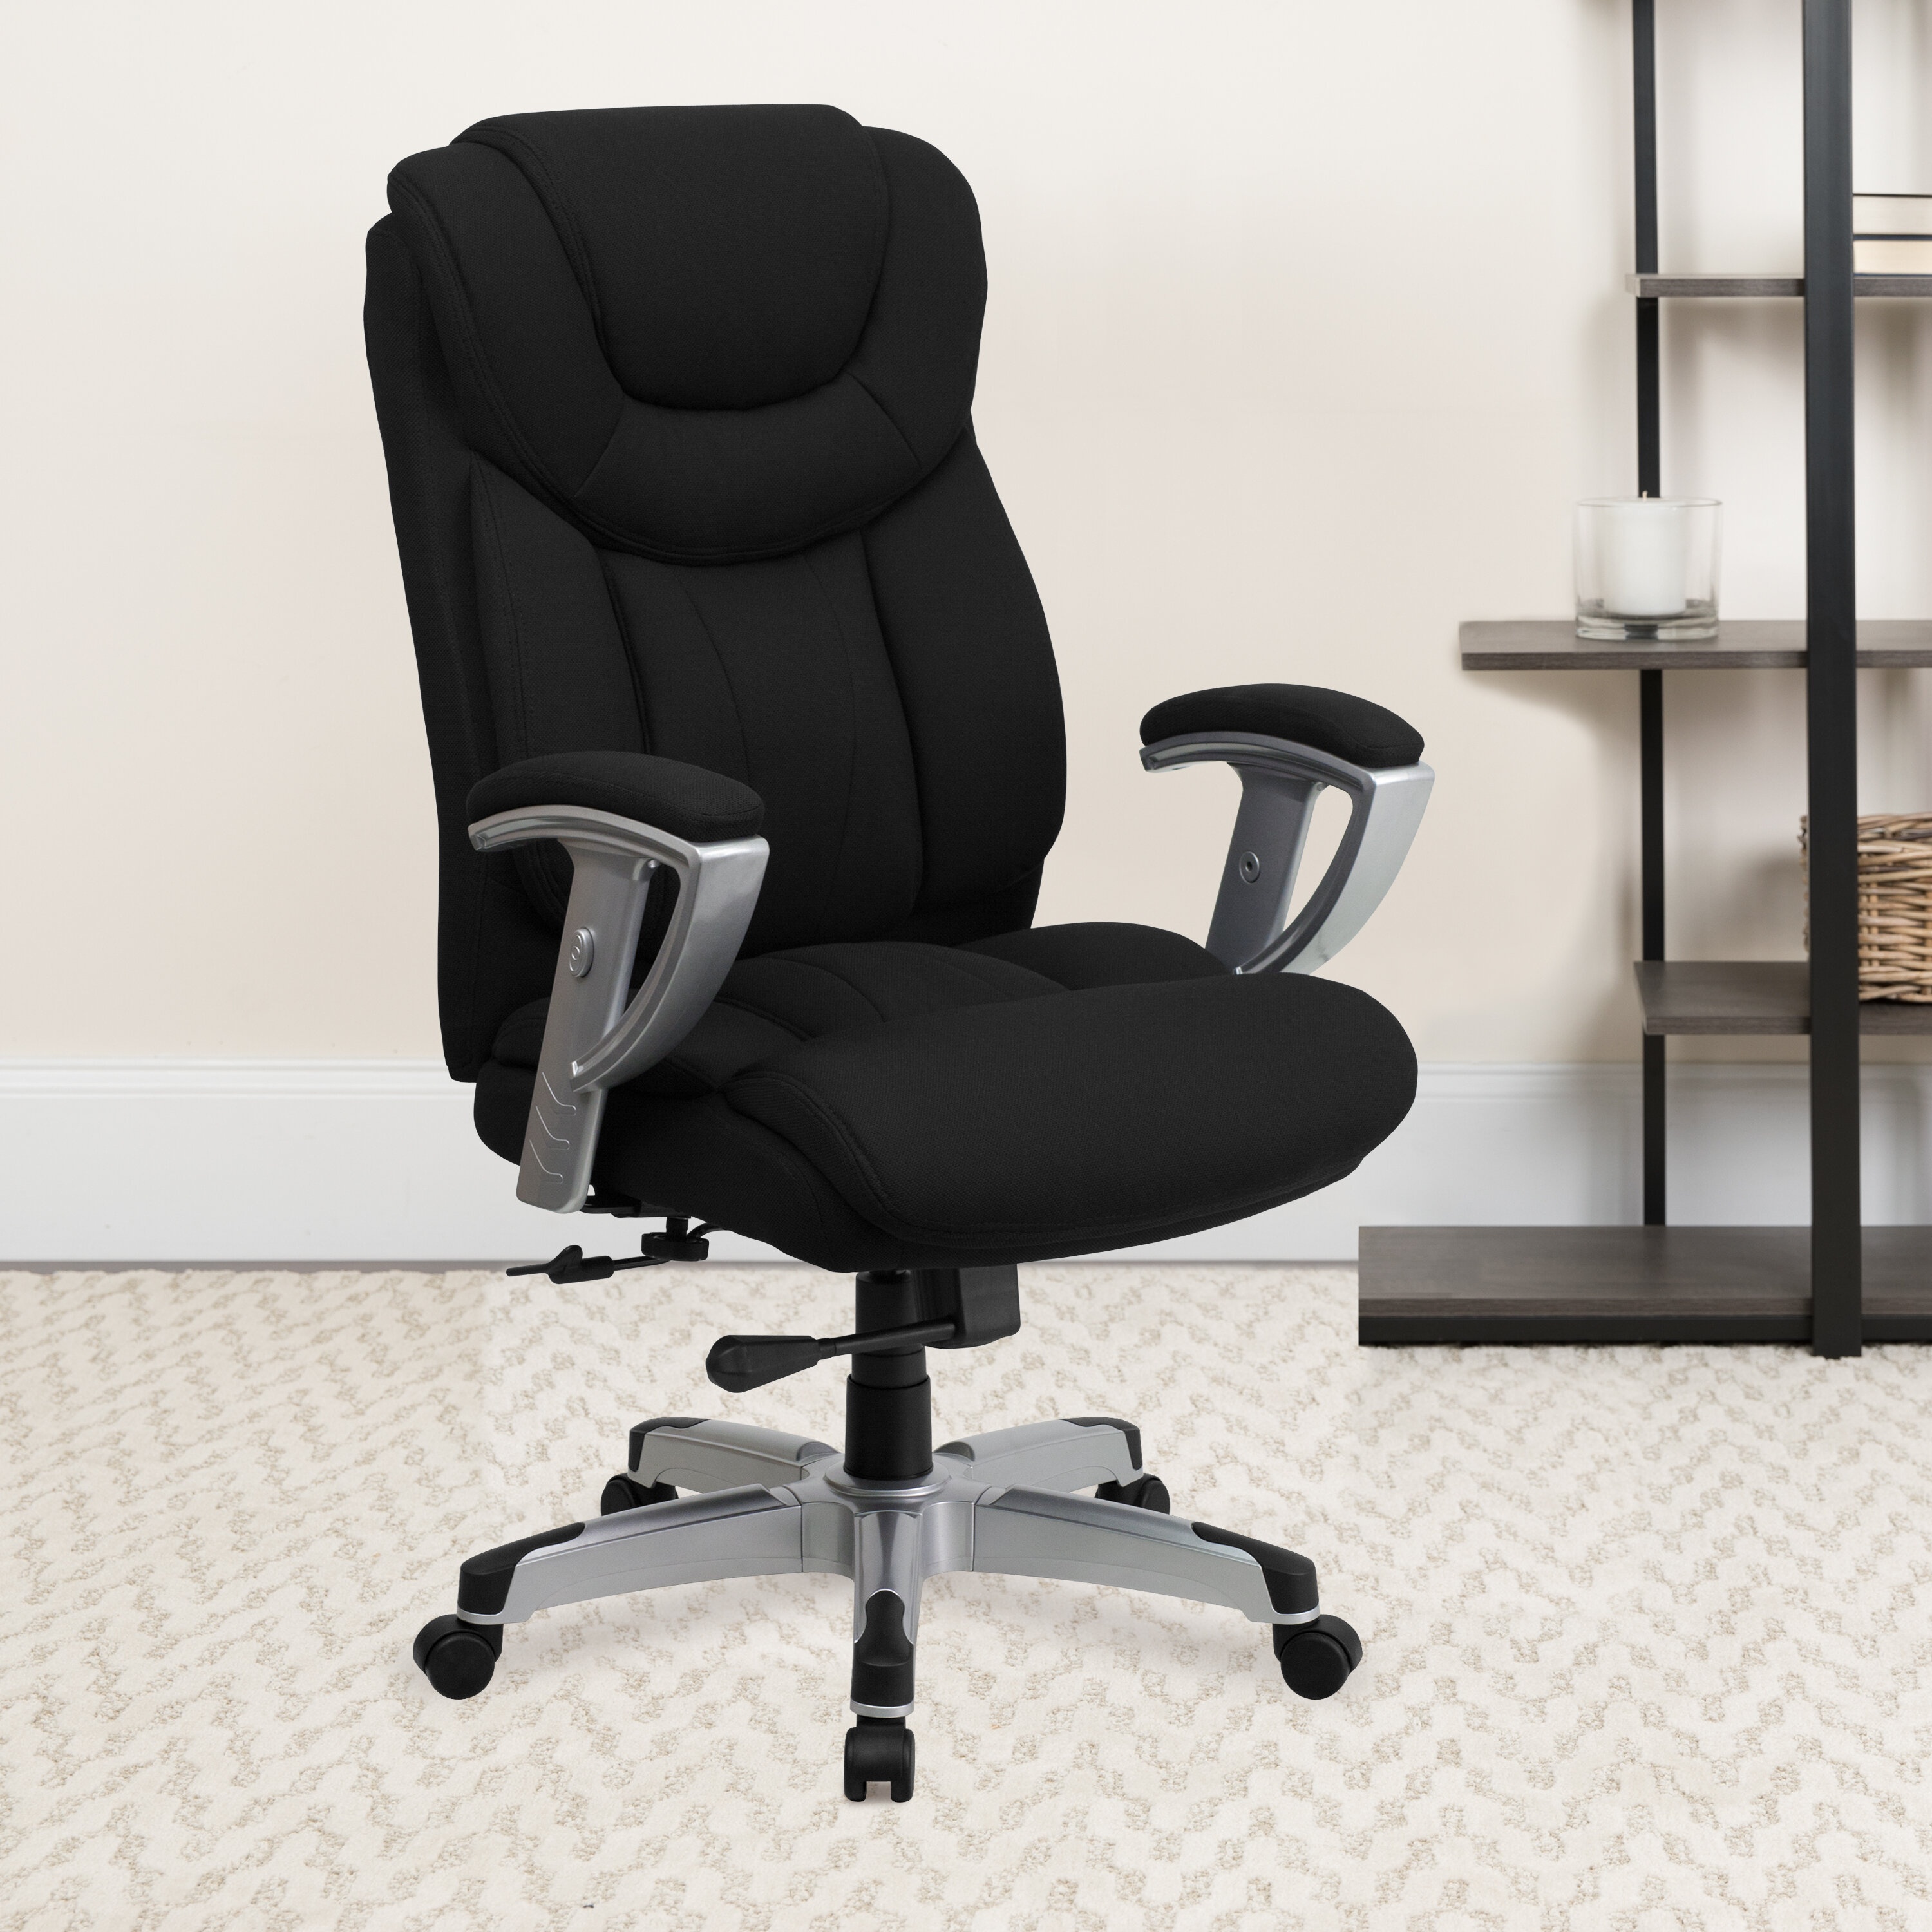 https://visualhunt.com/photos/23/oliverson-big-tall-400-lb-rated-high-back-executive-swivel-office-chair.jpg